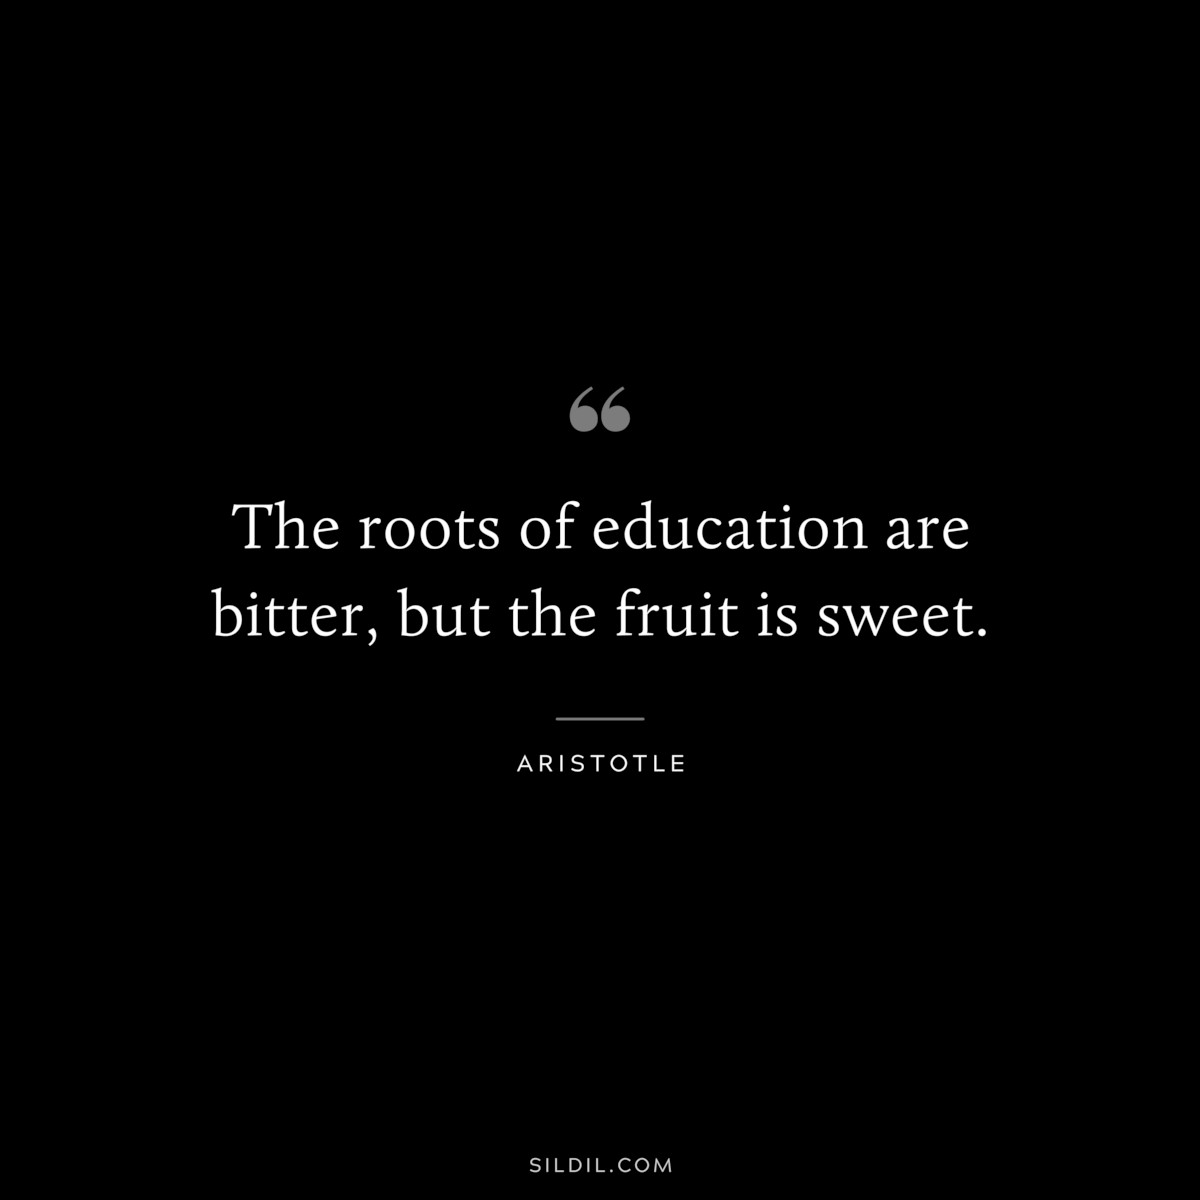 The roots of education are bitter, but the fruit is sweet. ― Aristotle